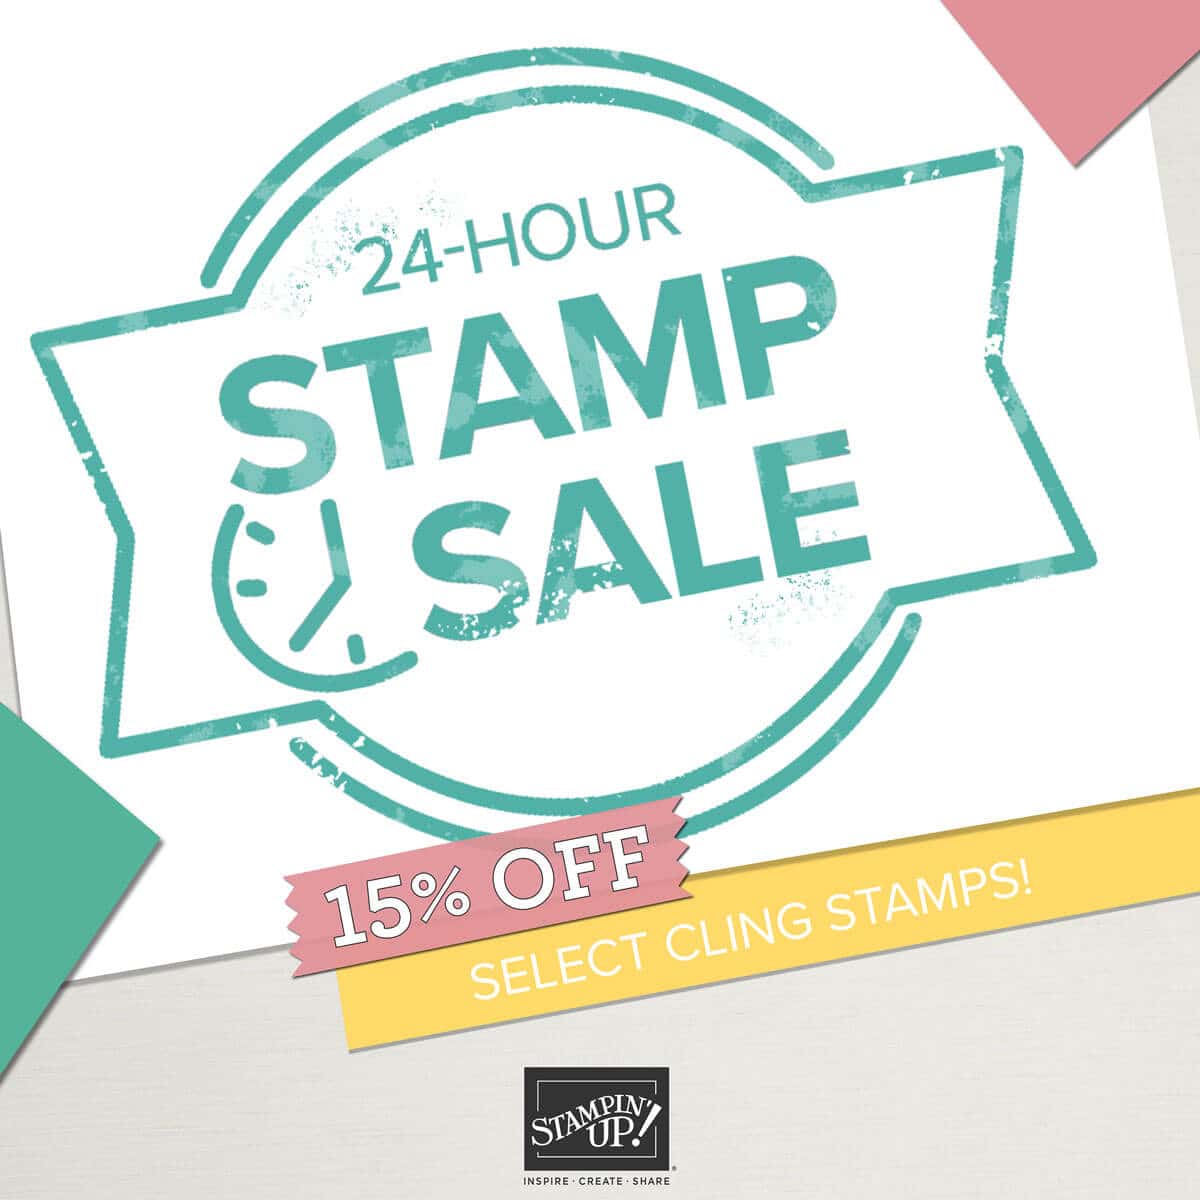 One Day Stampin Up Flash Sale!